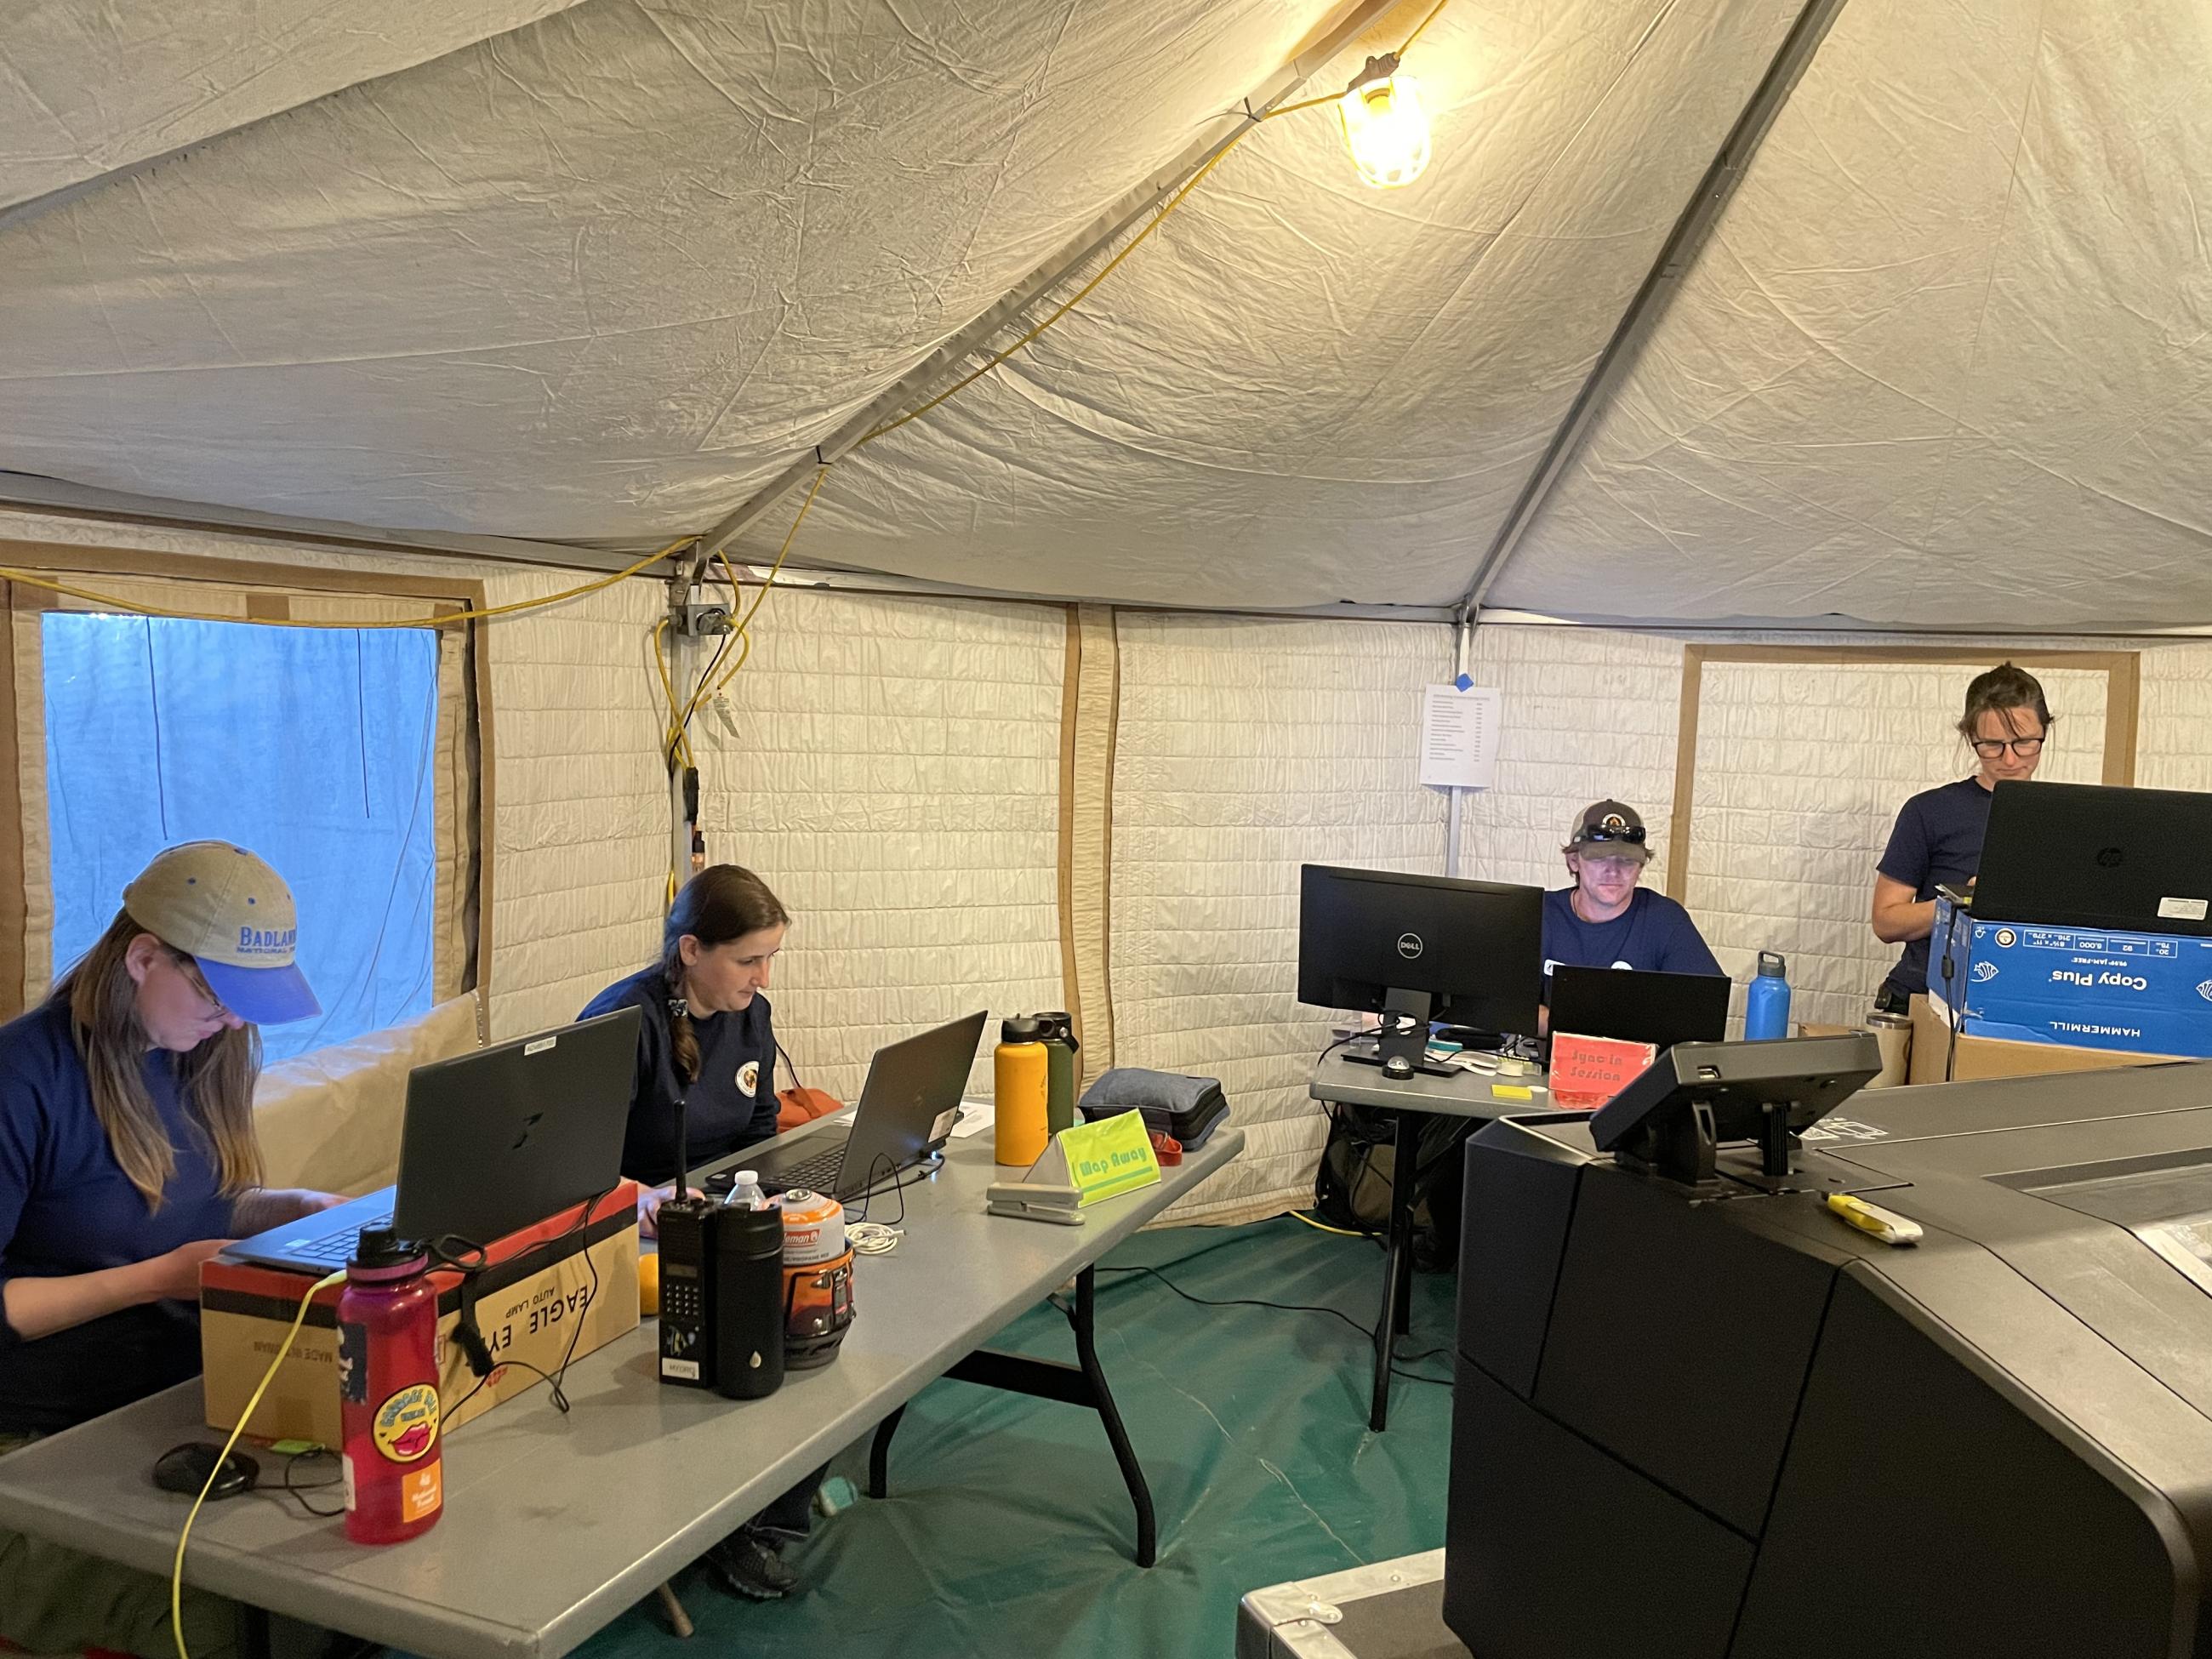 4 people on computers creating maps for incident personnel